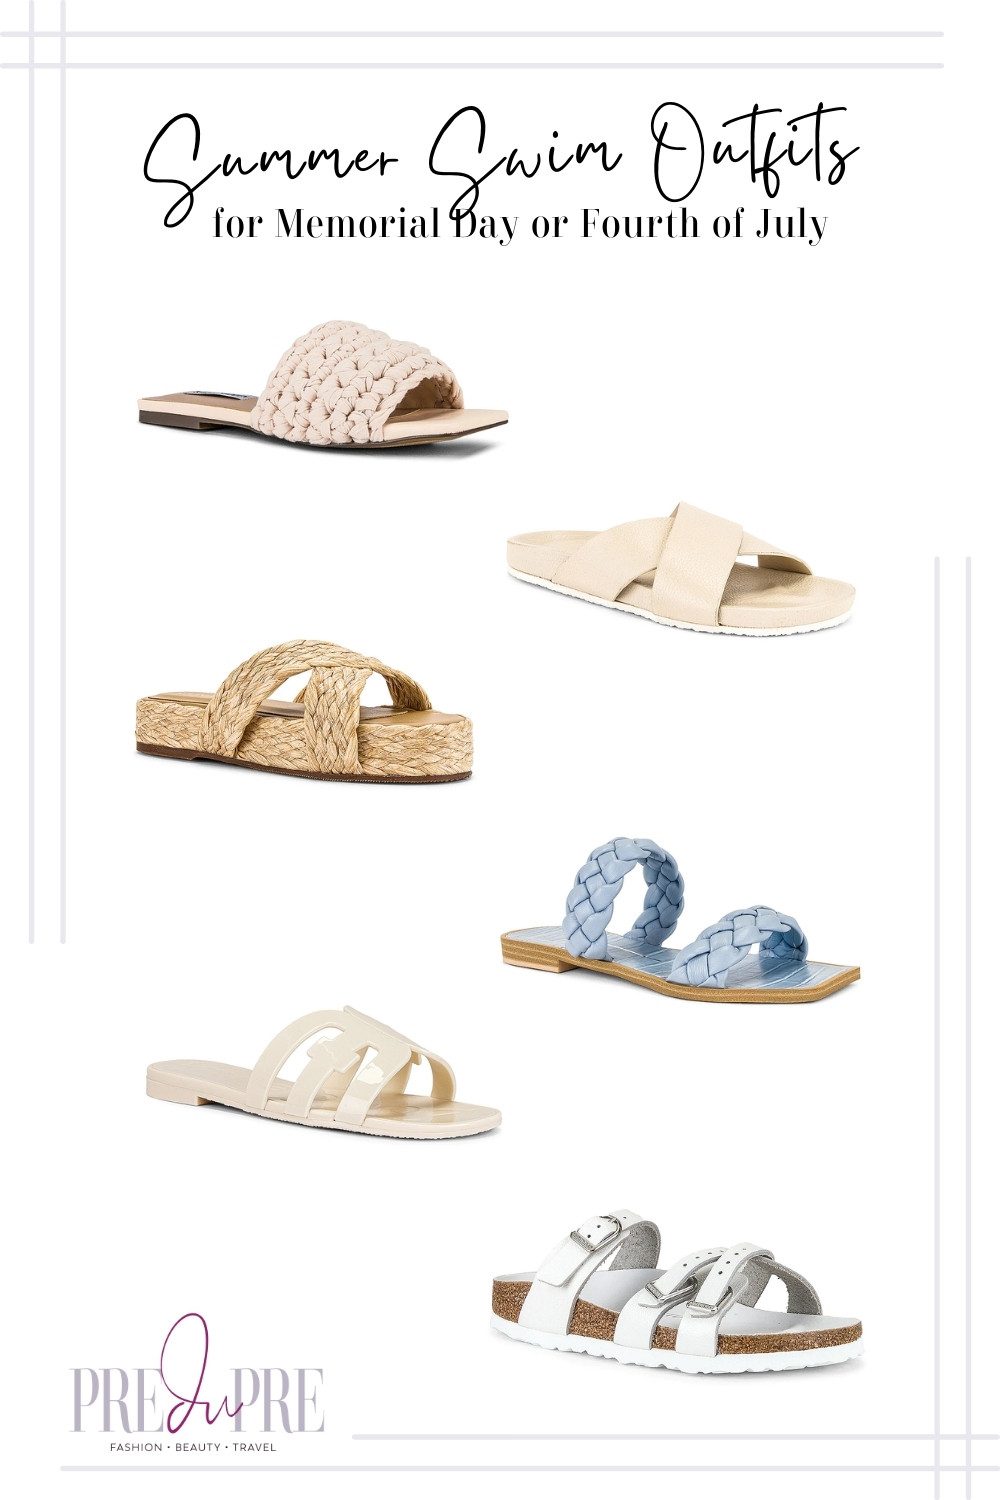 Collage of sandals for your pool/beach outfit for Memorial Day and/or Independence Day on Fourth of July.